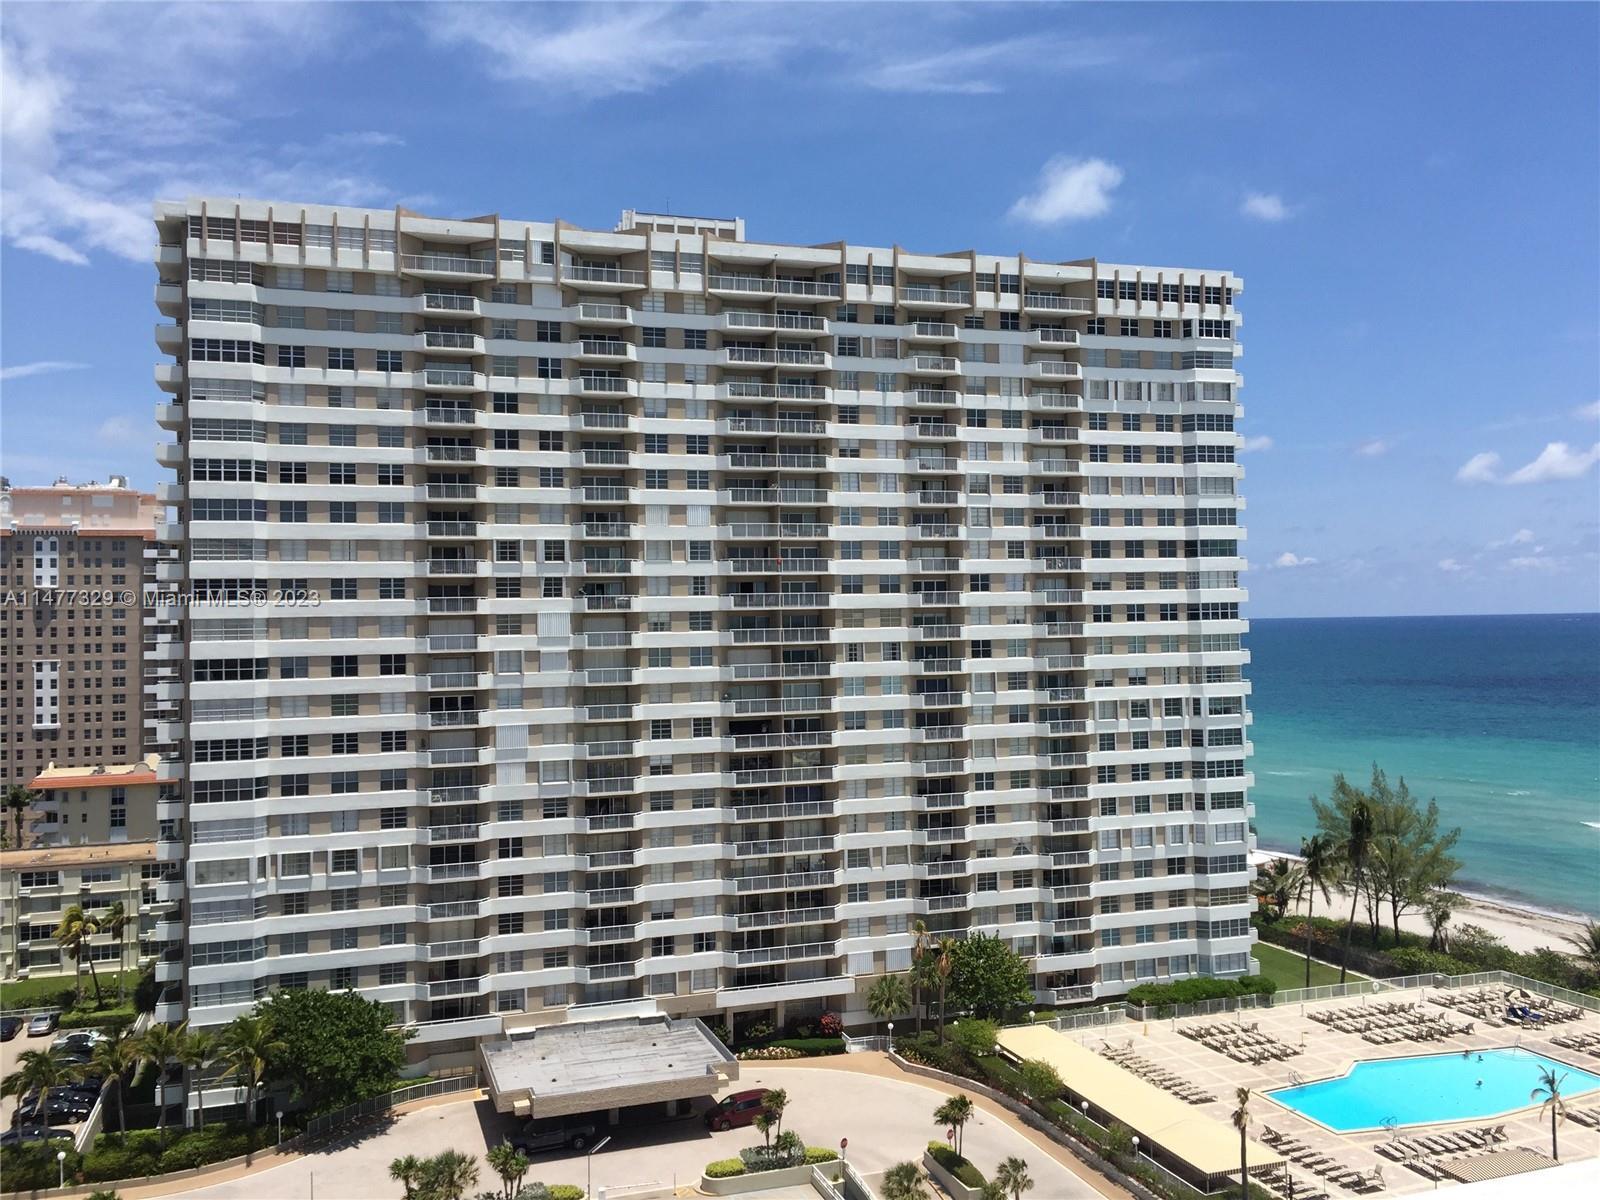 Enjoy life at the Hemispheres - one of the best High Rise buildings in Hallandale with great ameniti